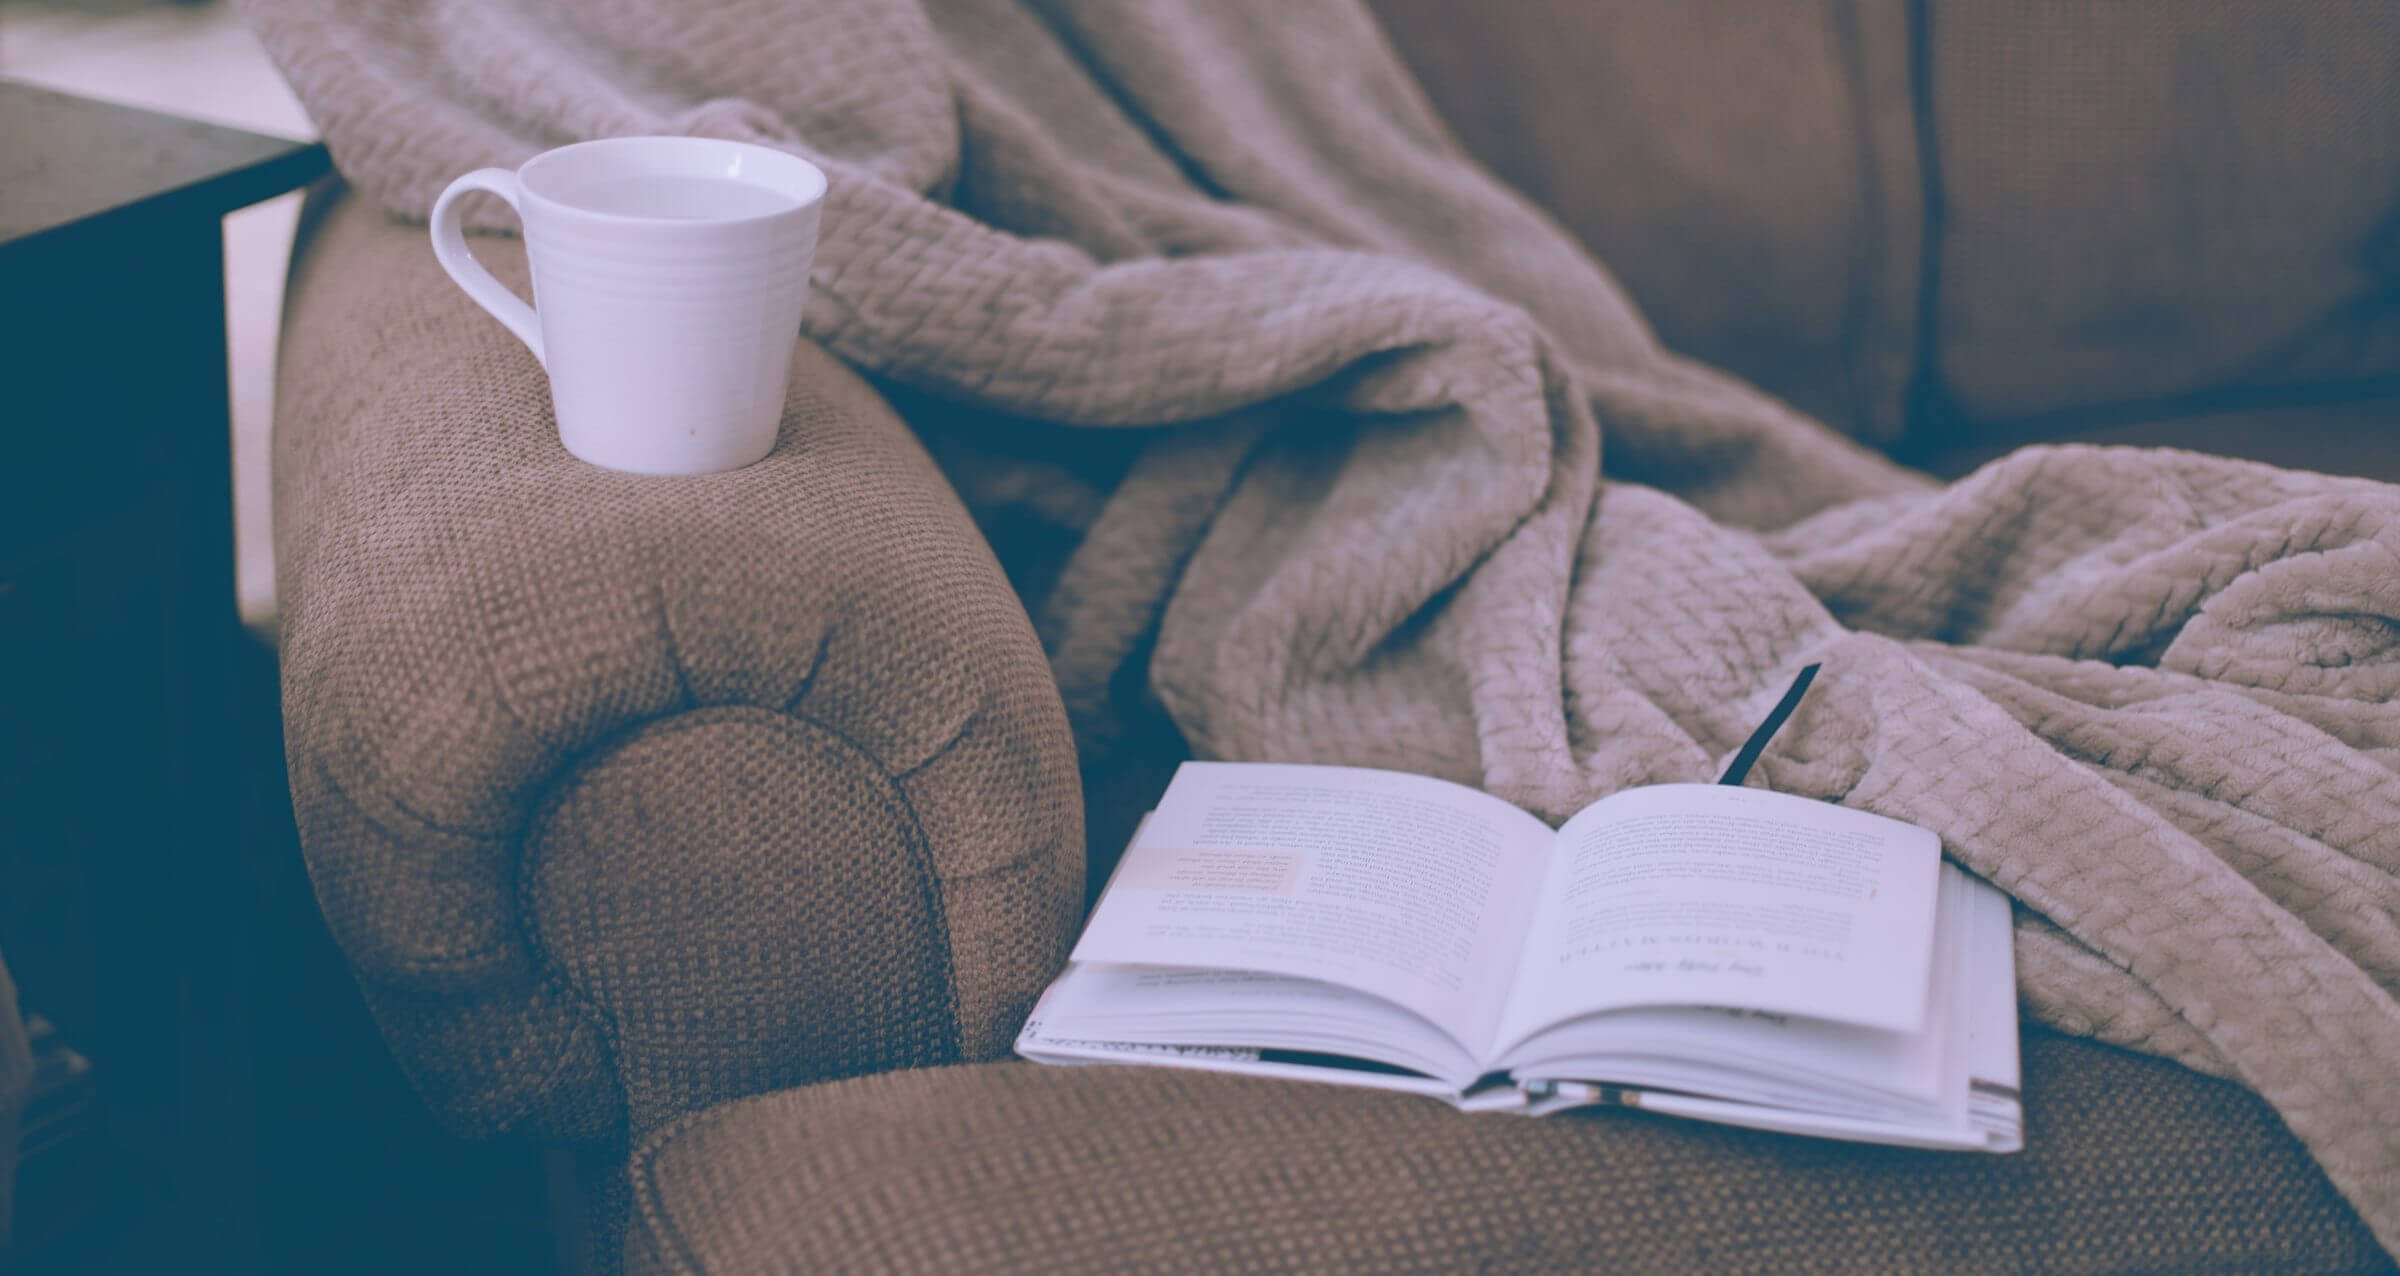 chair with blanket, book, and mug